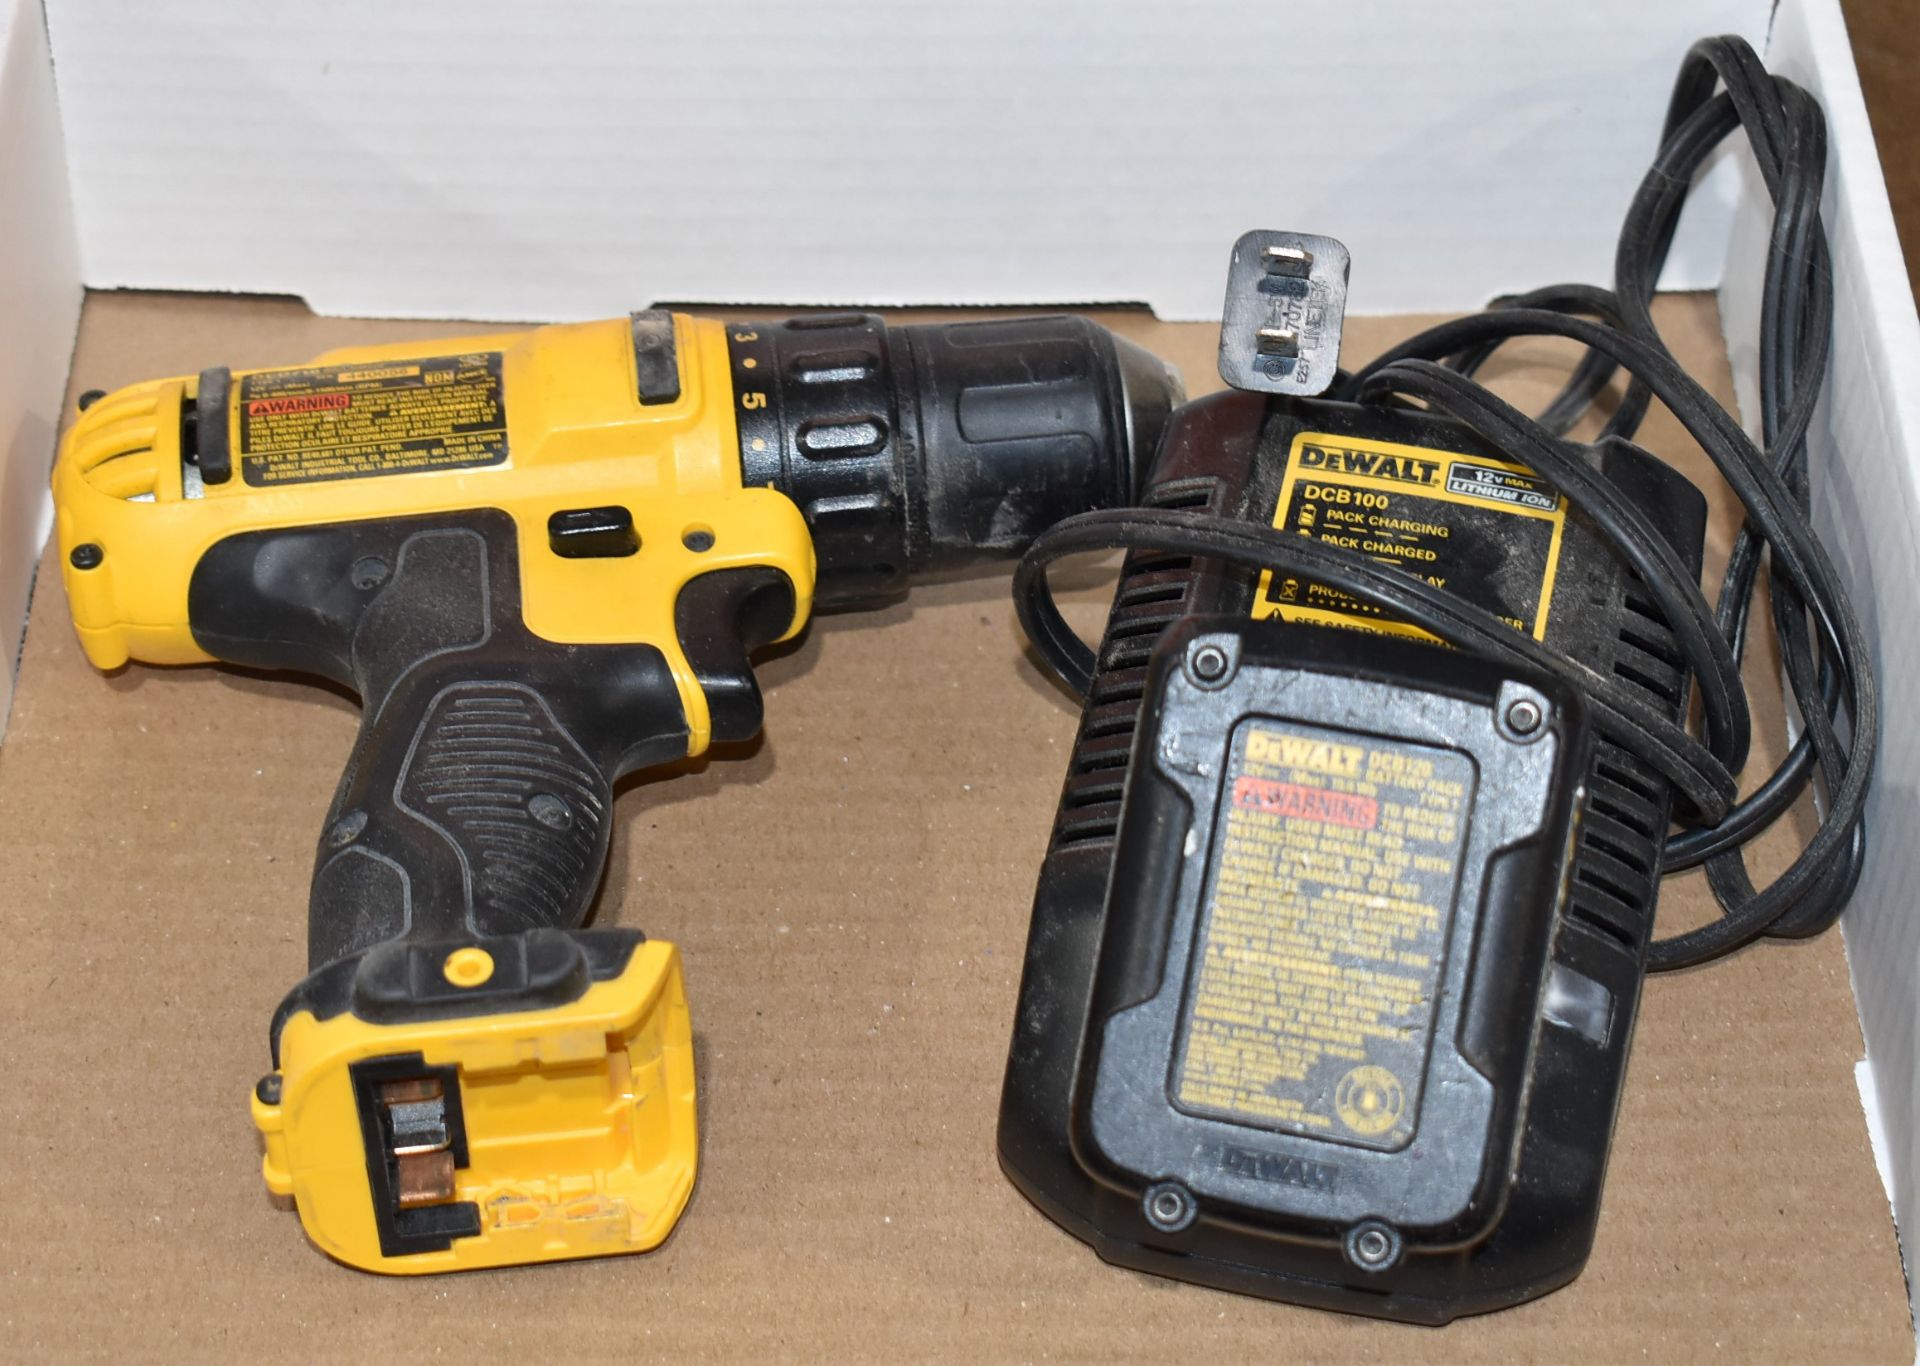 LOT/ DEWALT DCD710 3/8" CORDLESS DRILL WITH BATTERY & CHARGER - Image 2 of 3